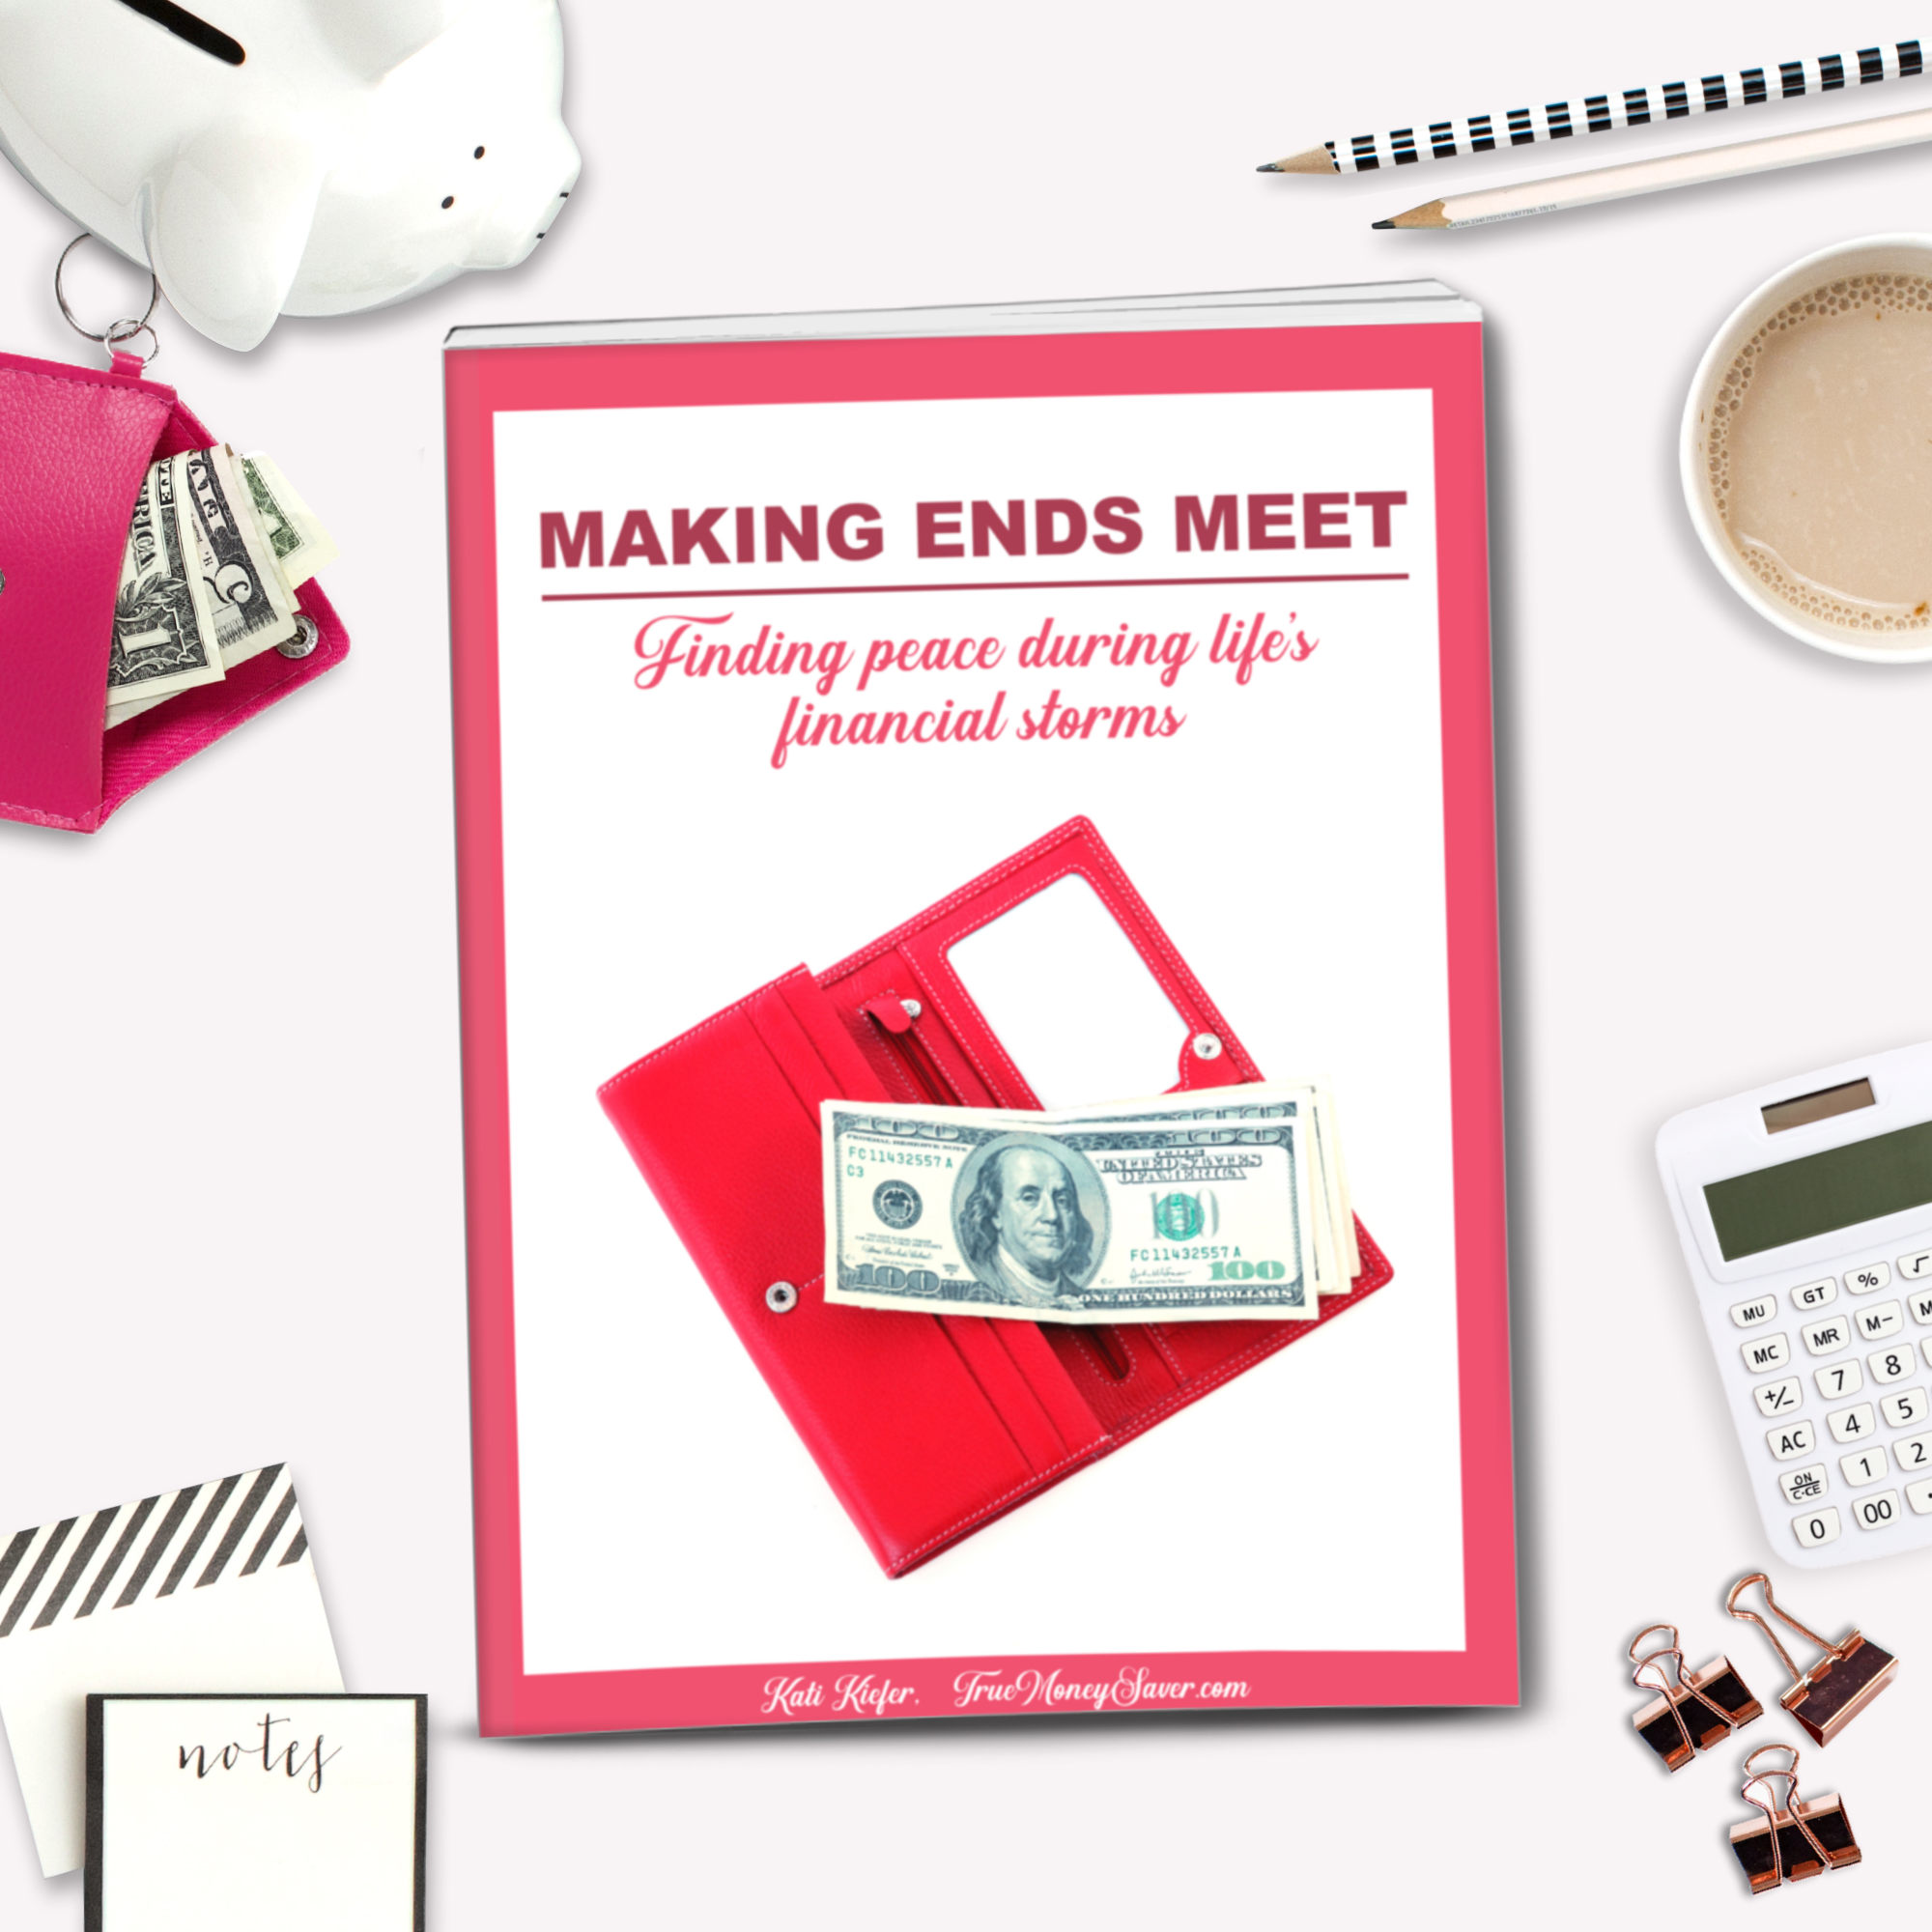 Making Ends Meet - How To Maximize Every Dollar